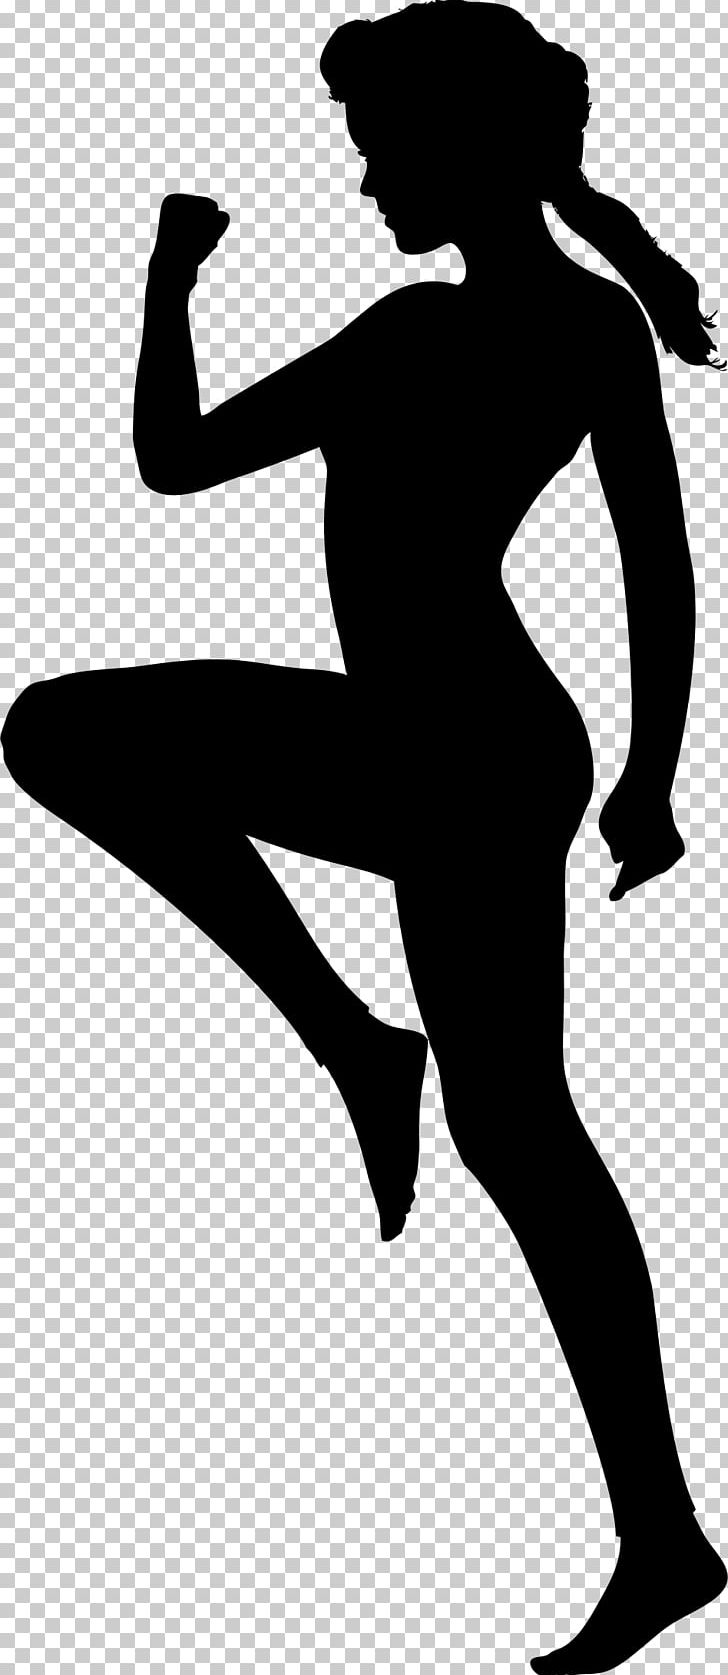 Physical Exercise Woman Silhouette Physical Fitness PNG, Clipart, Arm, Art, Black, Black And White, Exercise Balls Free PNG Download